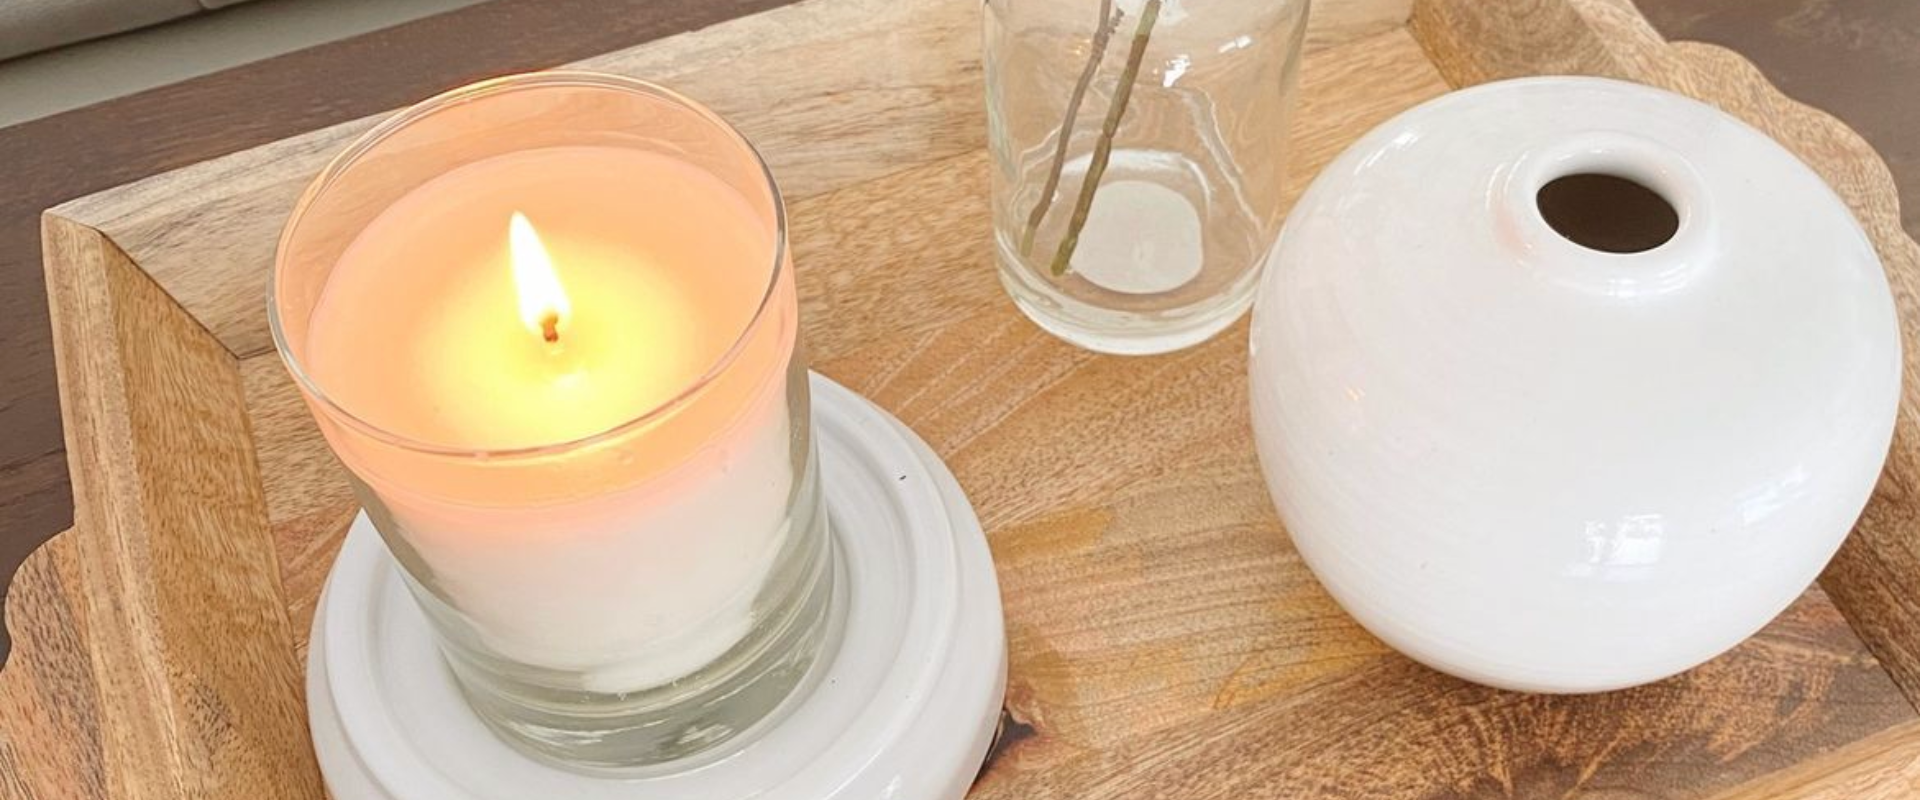 How Candles Relieve Stress and Anxiety So You Find Calmness in the Flame